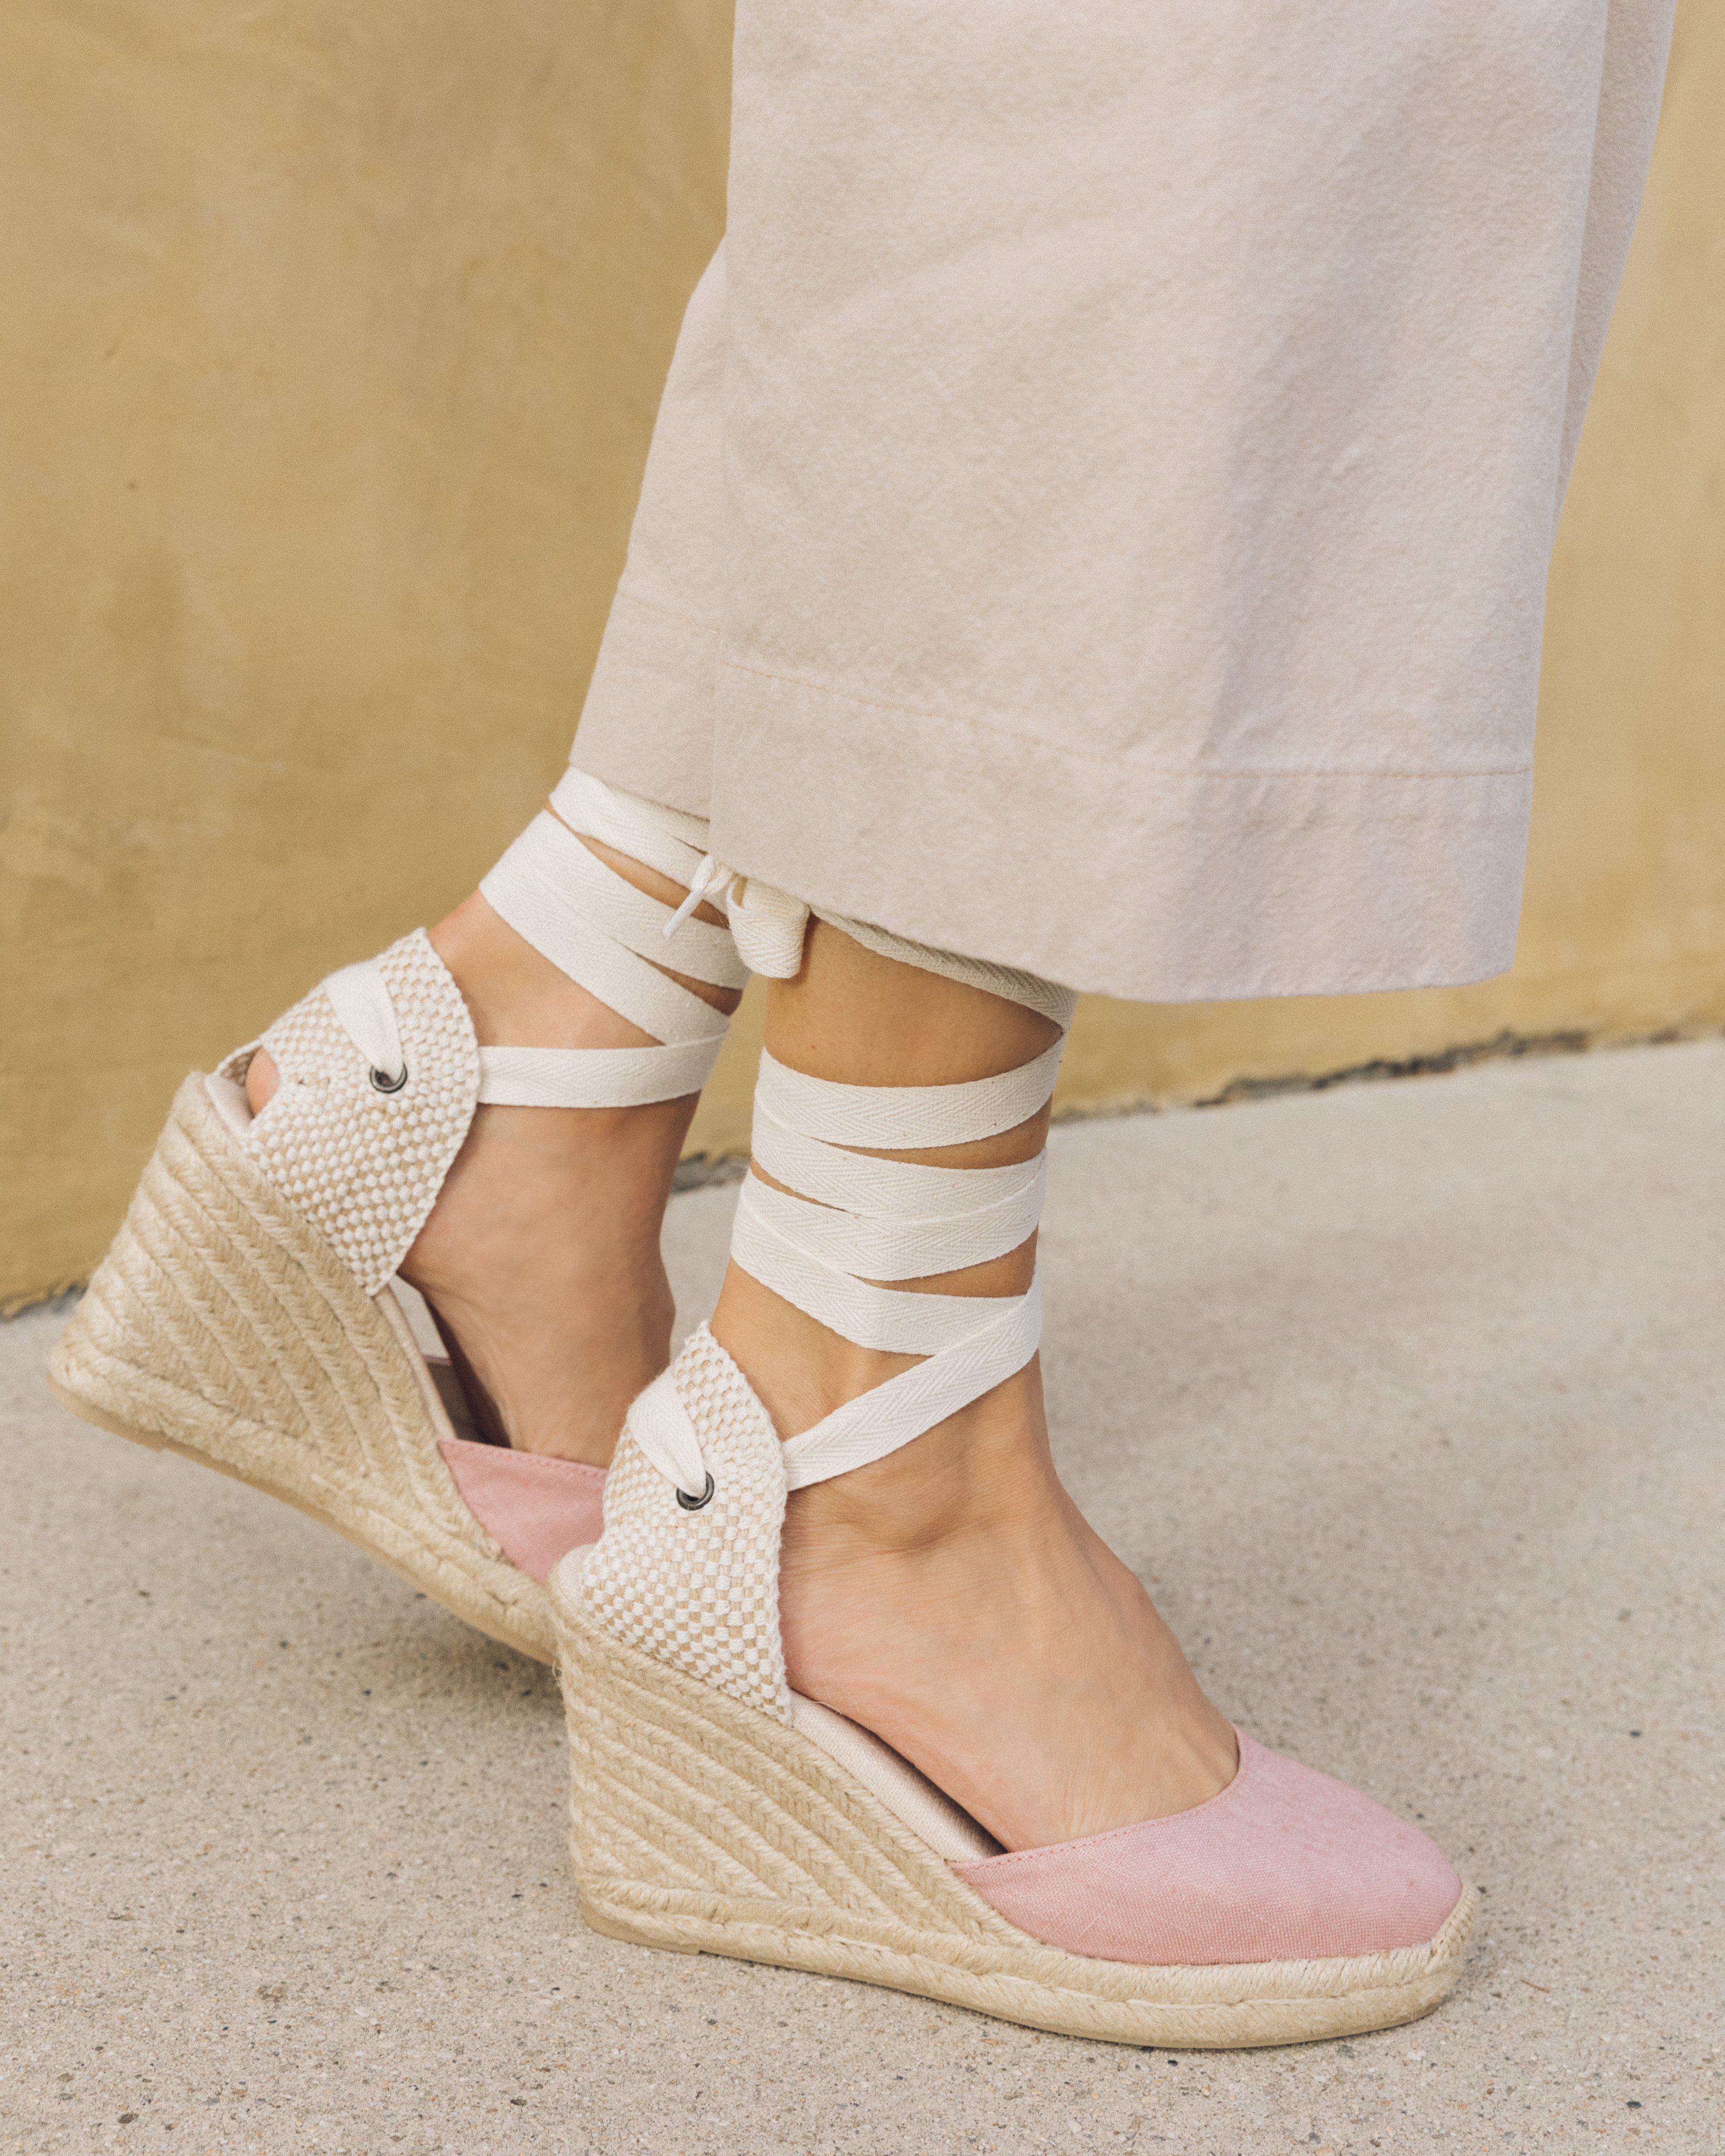 soludos wedges